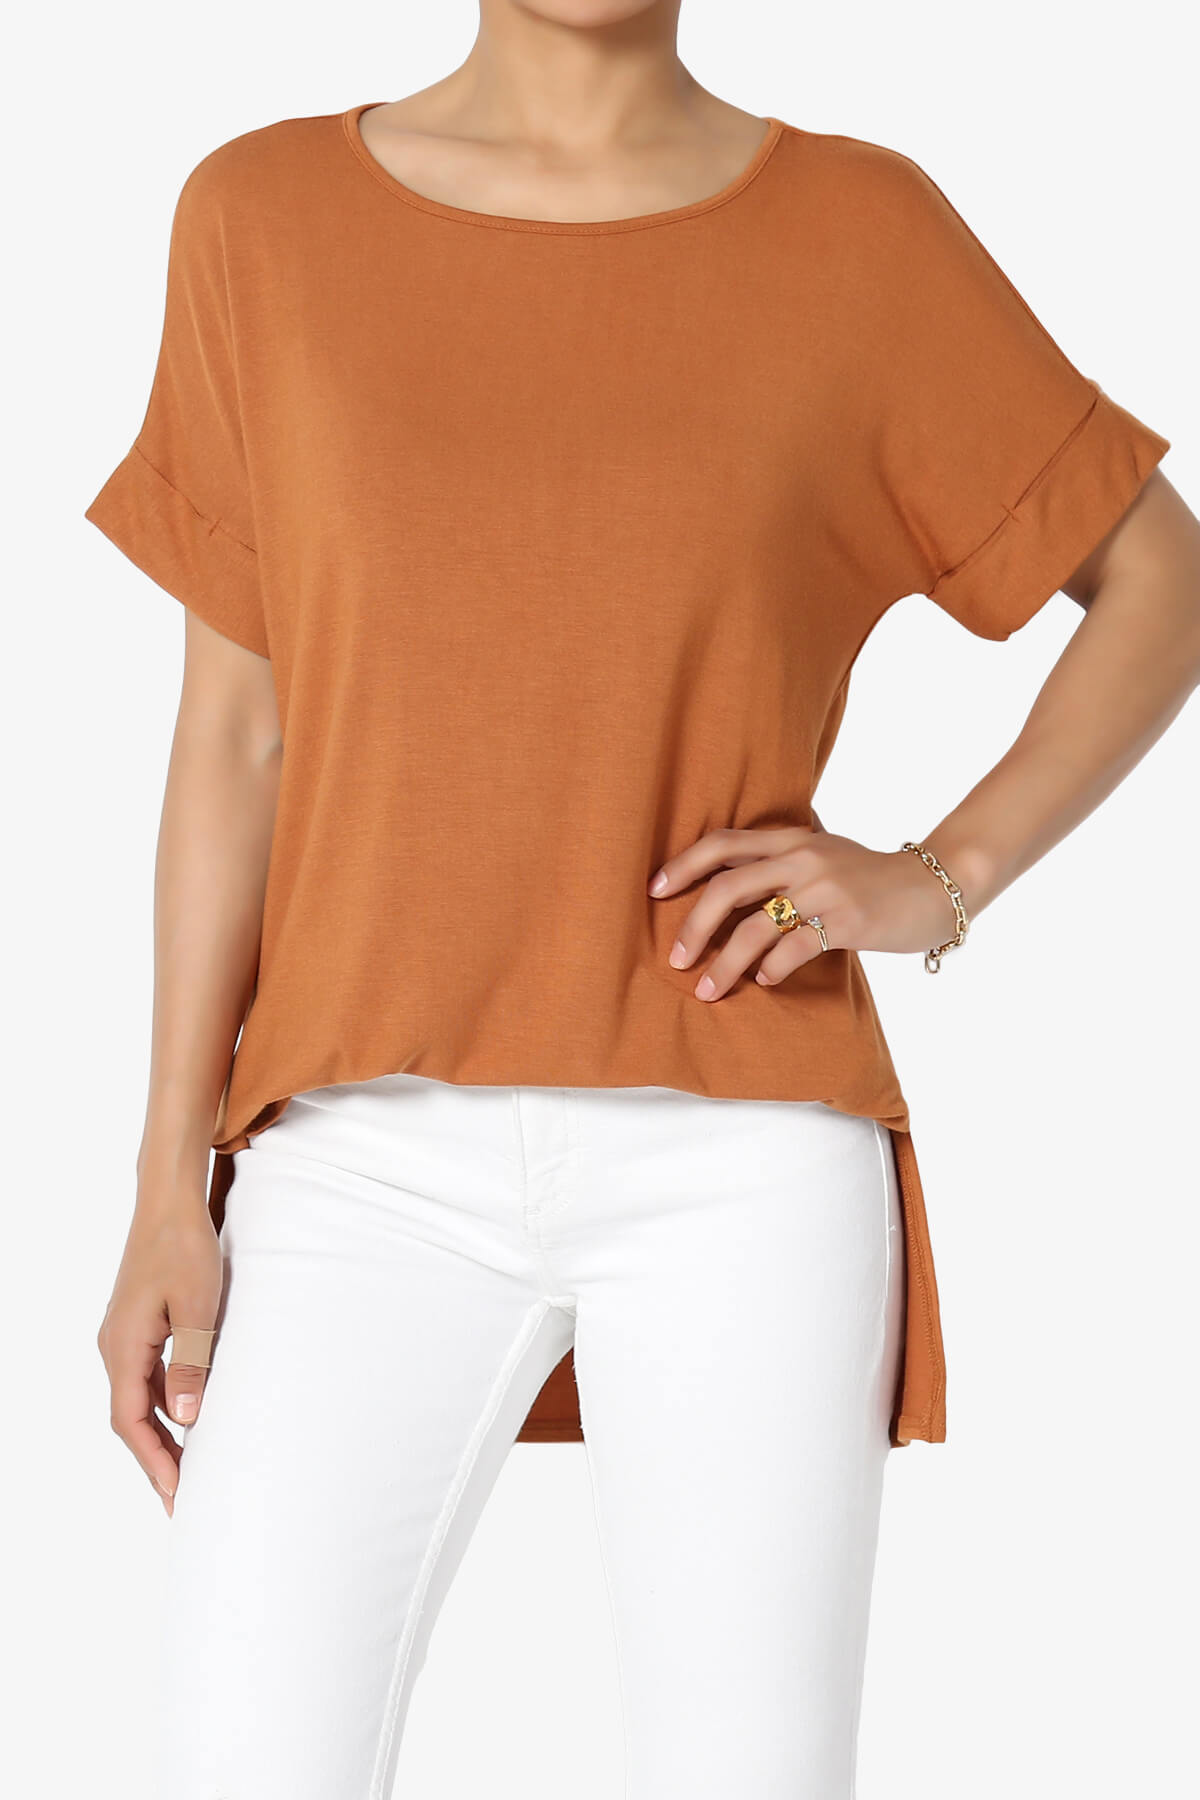 Load image into Gallery viewer, Poloma Modal Jersey Boat Neck Top ALMOND_1
